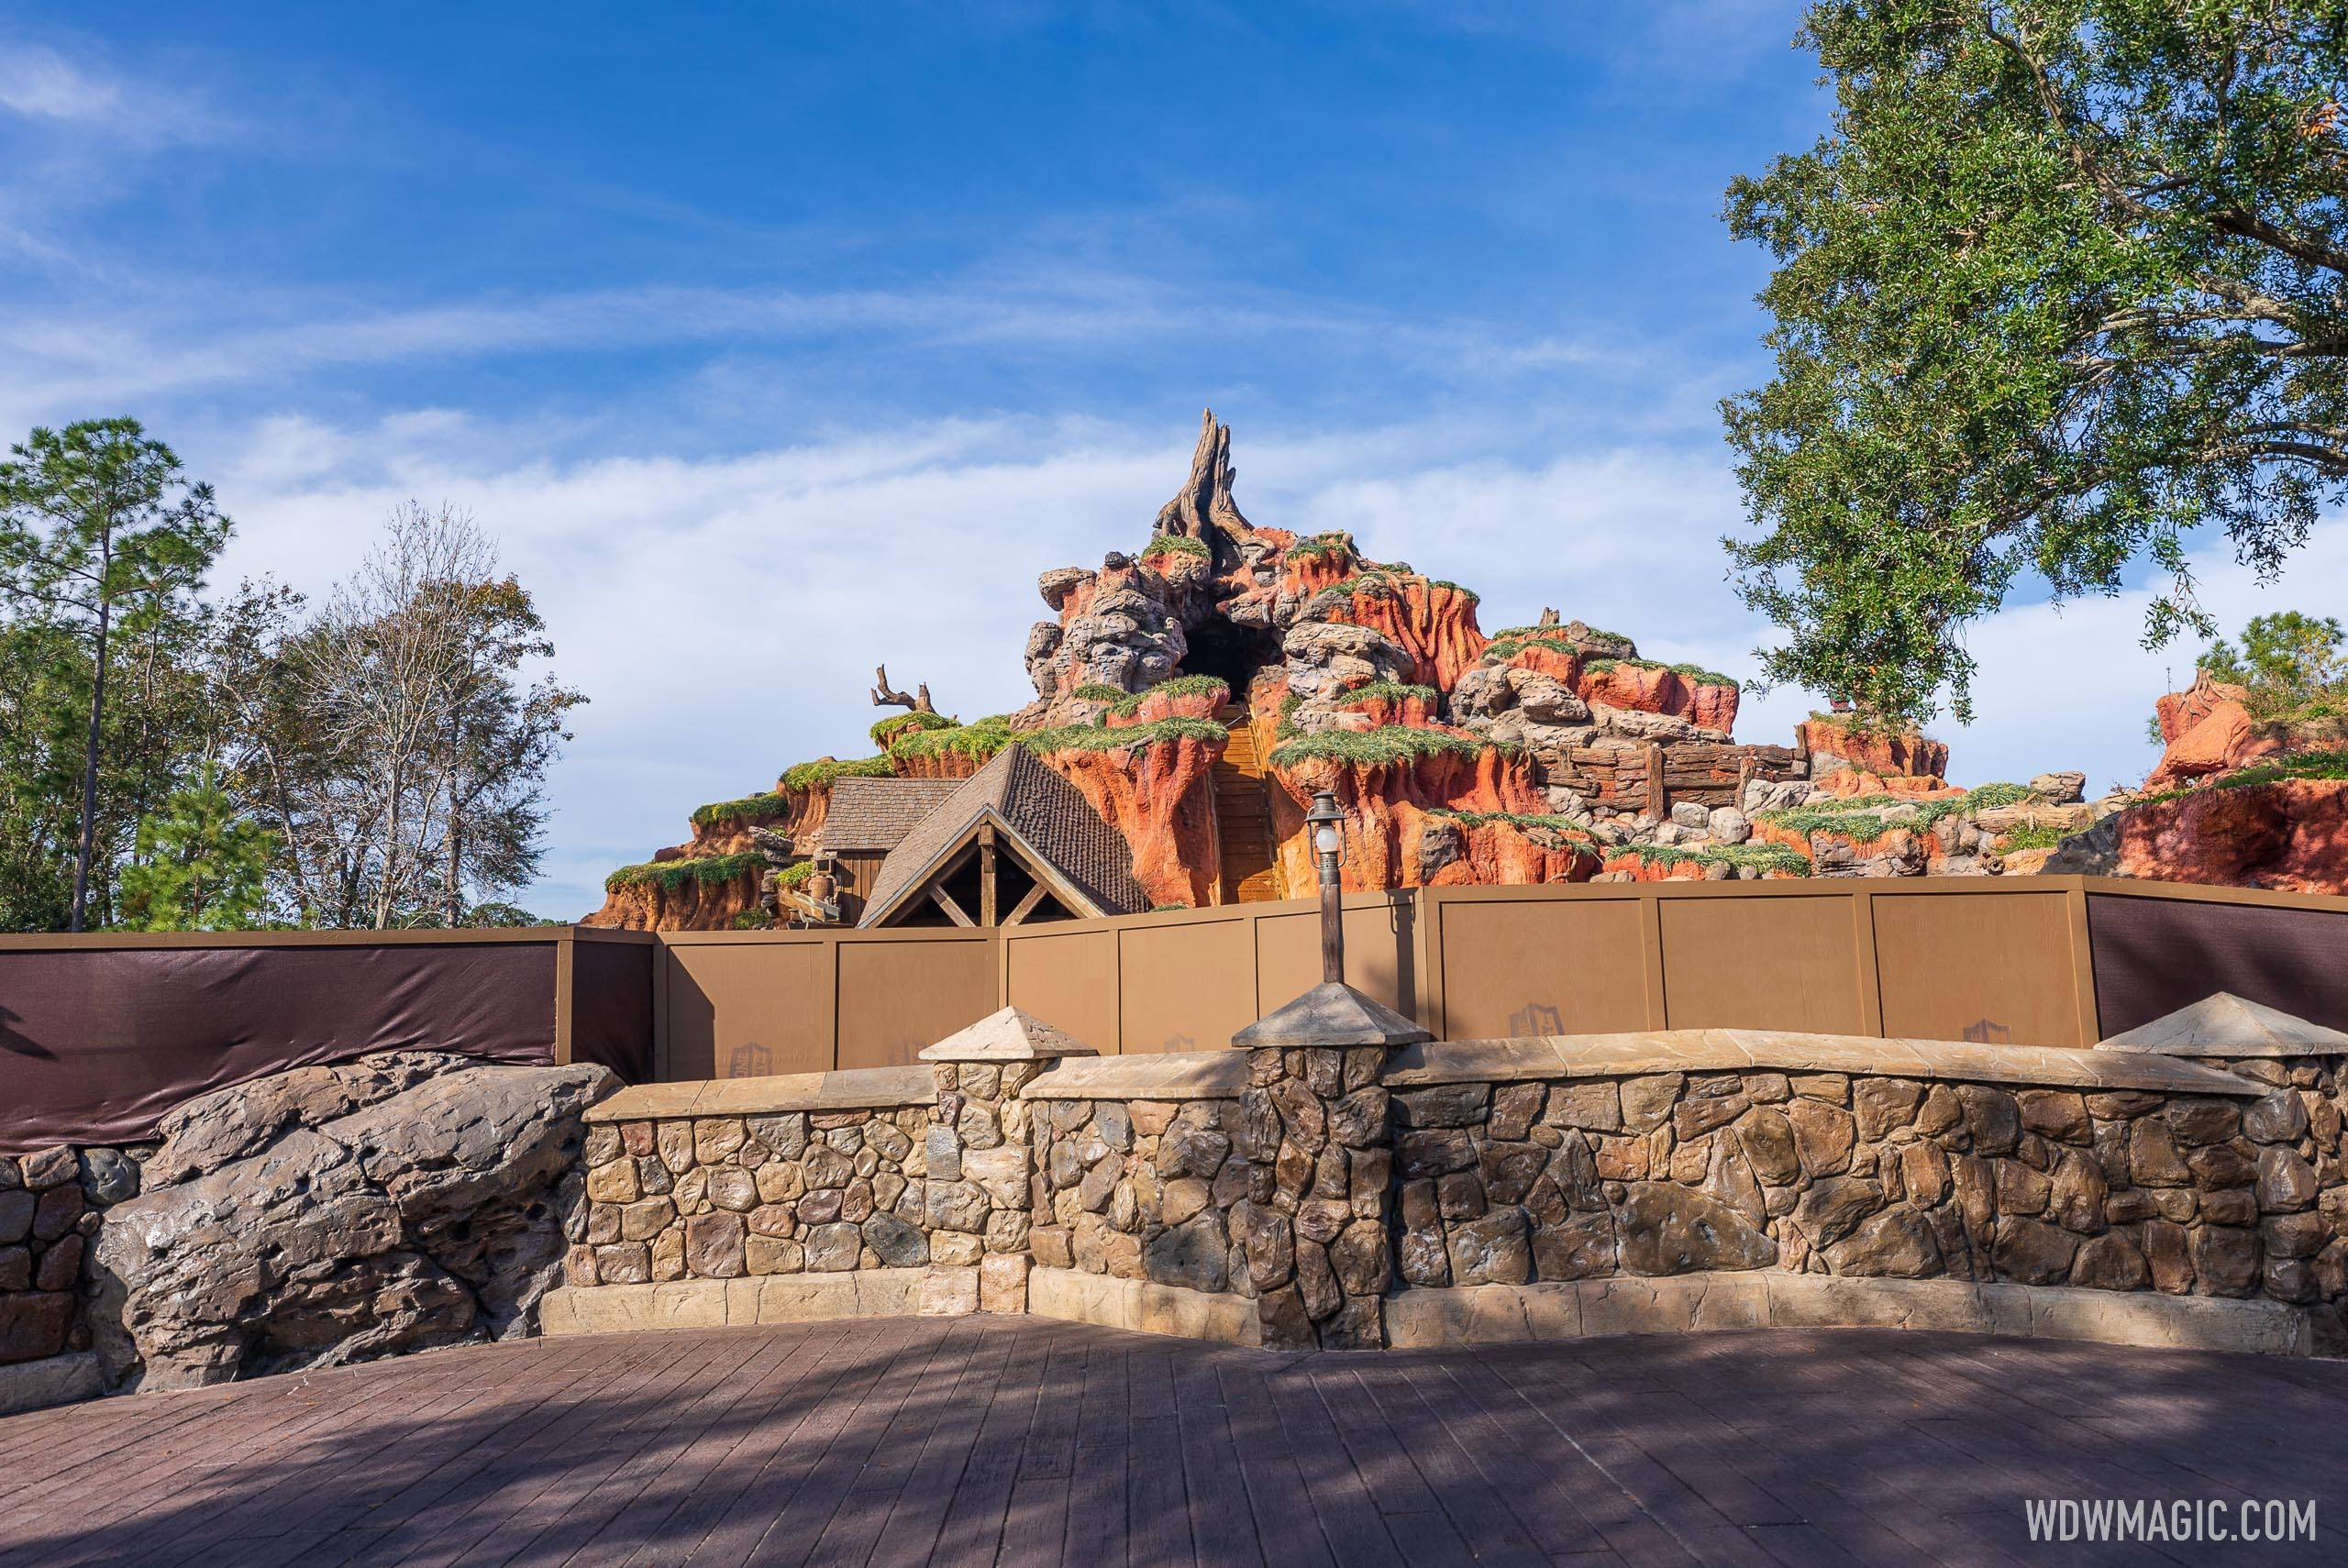 Taller construction walls go up around Tiana's Bayou Adventure at the former Splash Mountain attraction